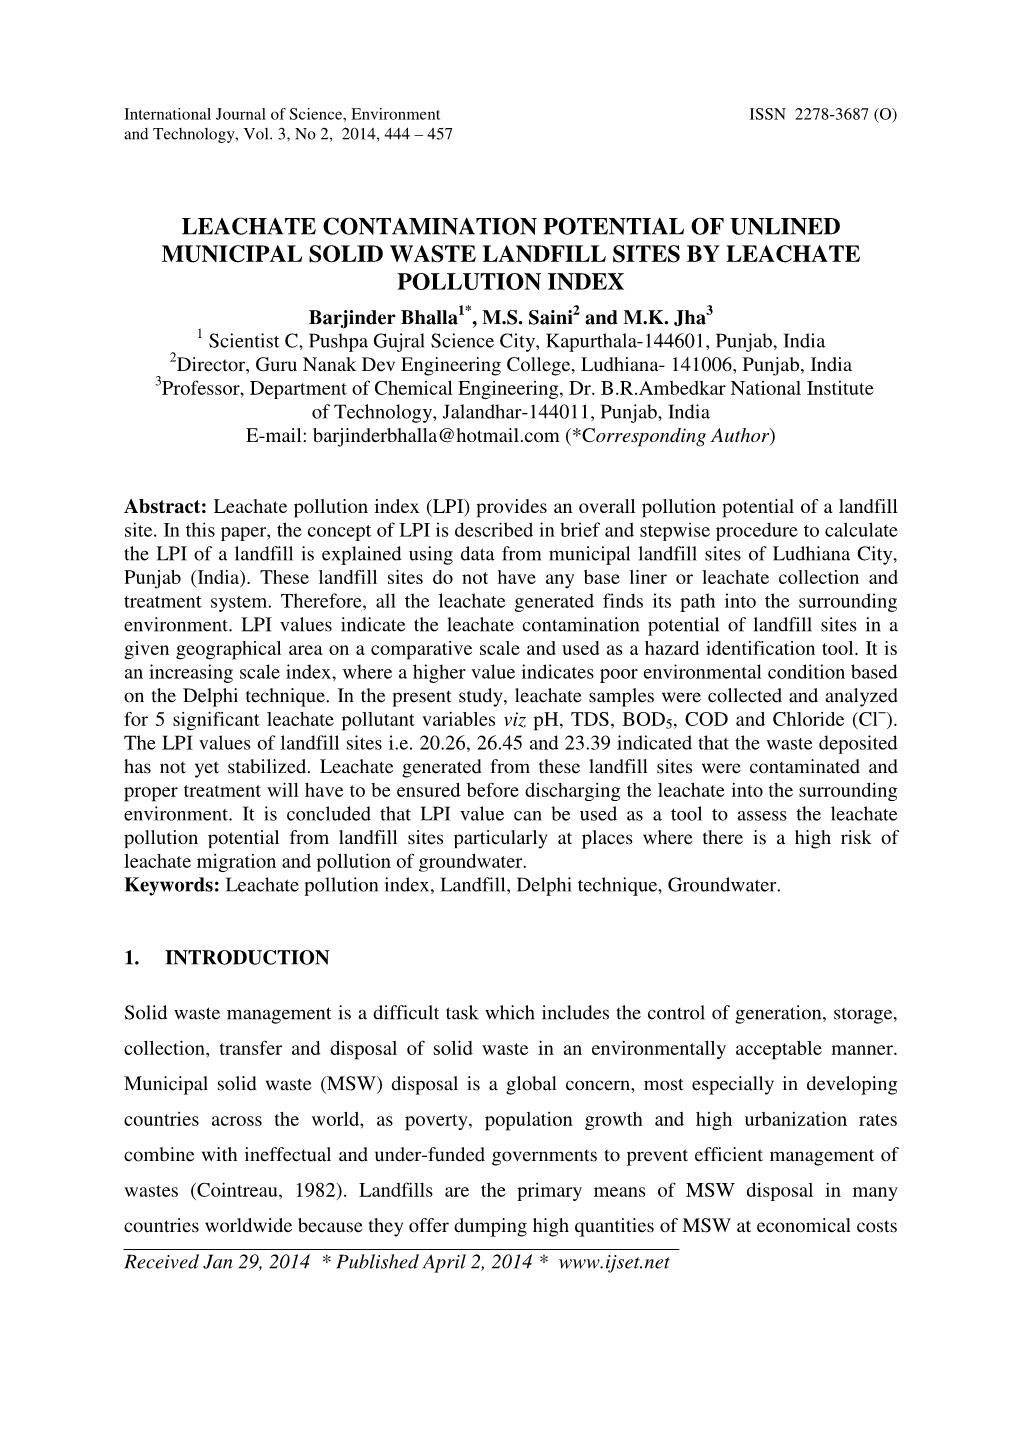 LEACHATE CONTAMINATION POTENTIAL of UNLINED MUNICIPAL SOLID WASTE LANDFILL SITES by LEACHATE POLLUTION INDEX Barjinder Bhalla1*, M.S